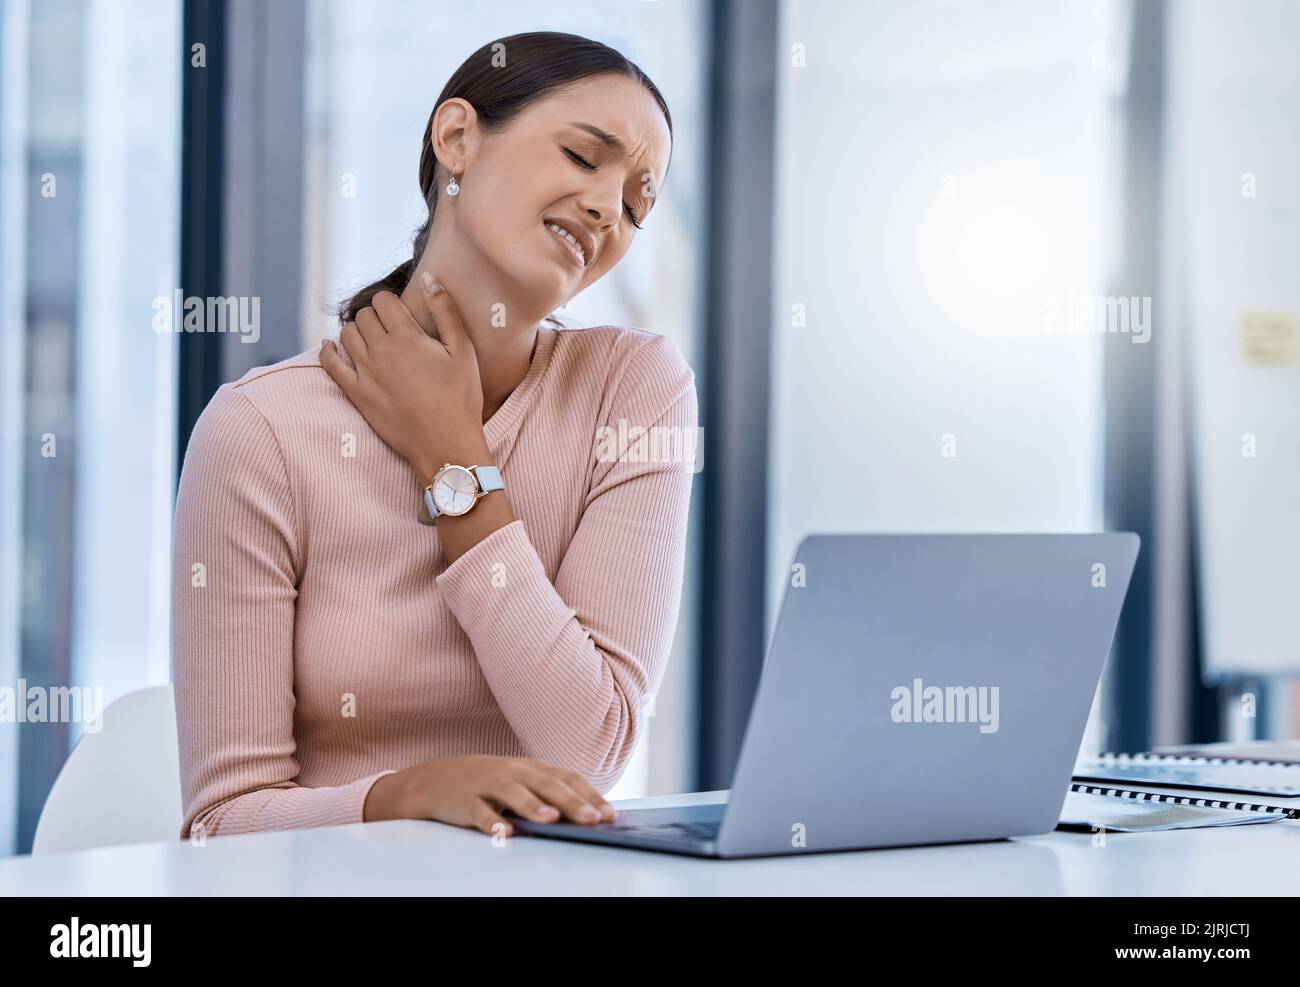 Stress woman suffering from neck pain working on a laptop in a modern office. Corporate professional with bad posture and an injury. Business SEO Stock Photo